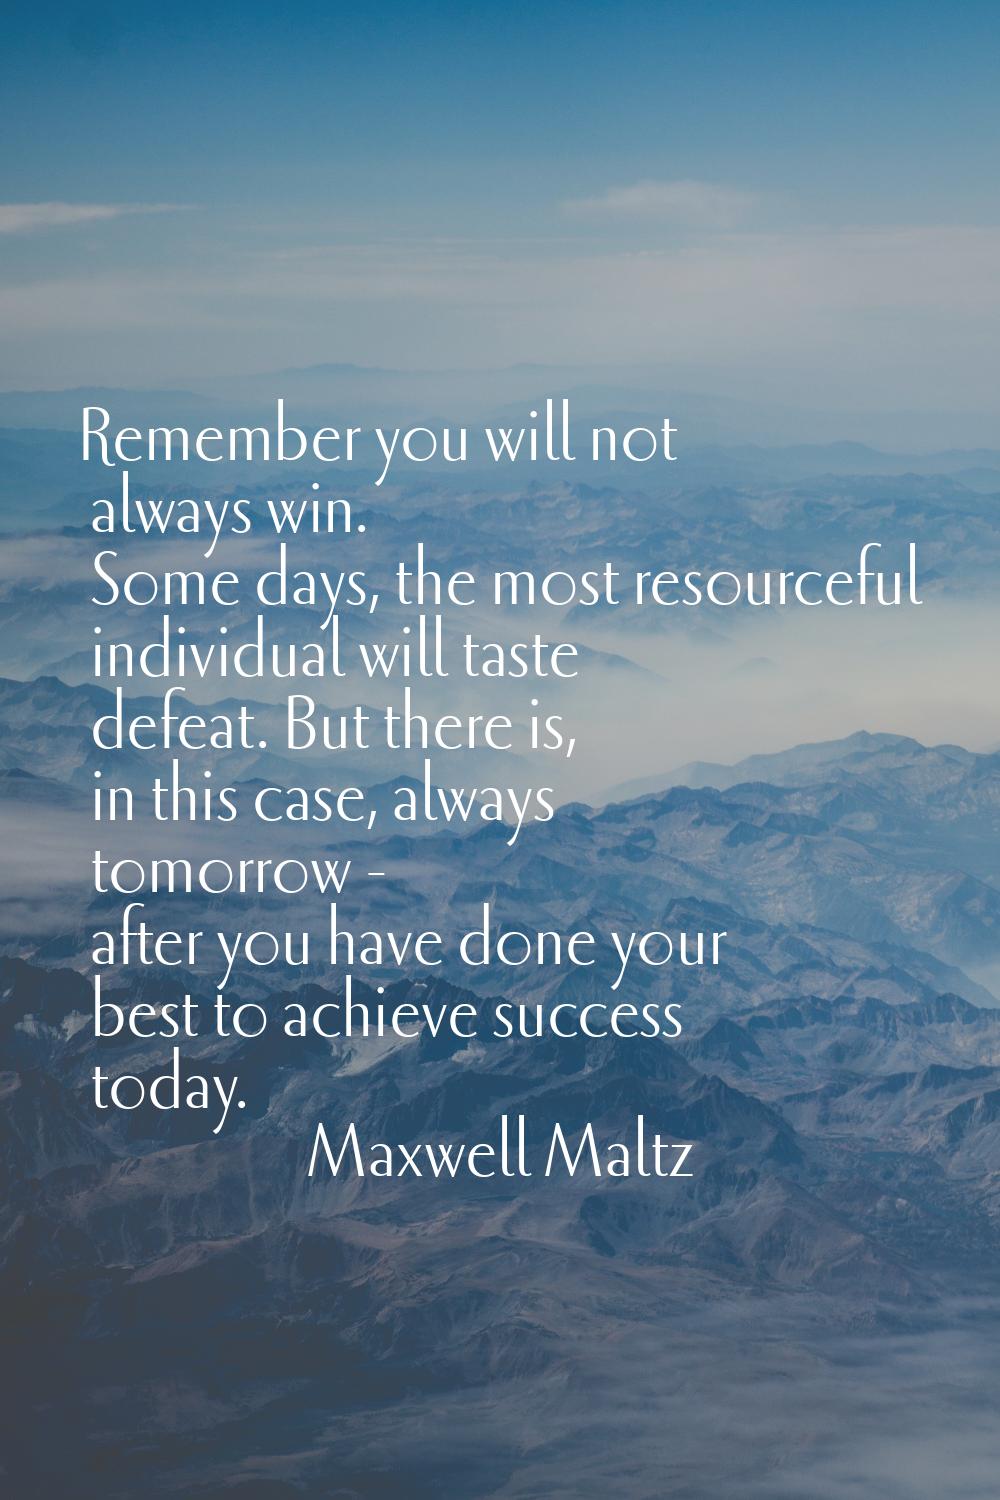 Remember you will not always win. Some days, the most resourceful individual will taste defeat. But